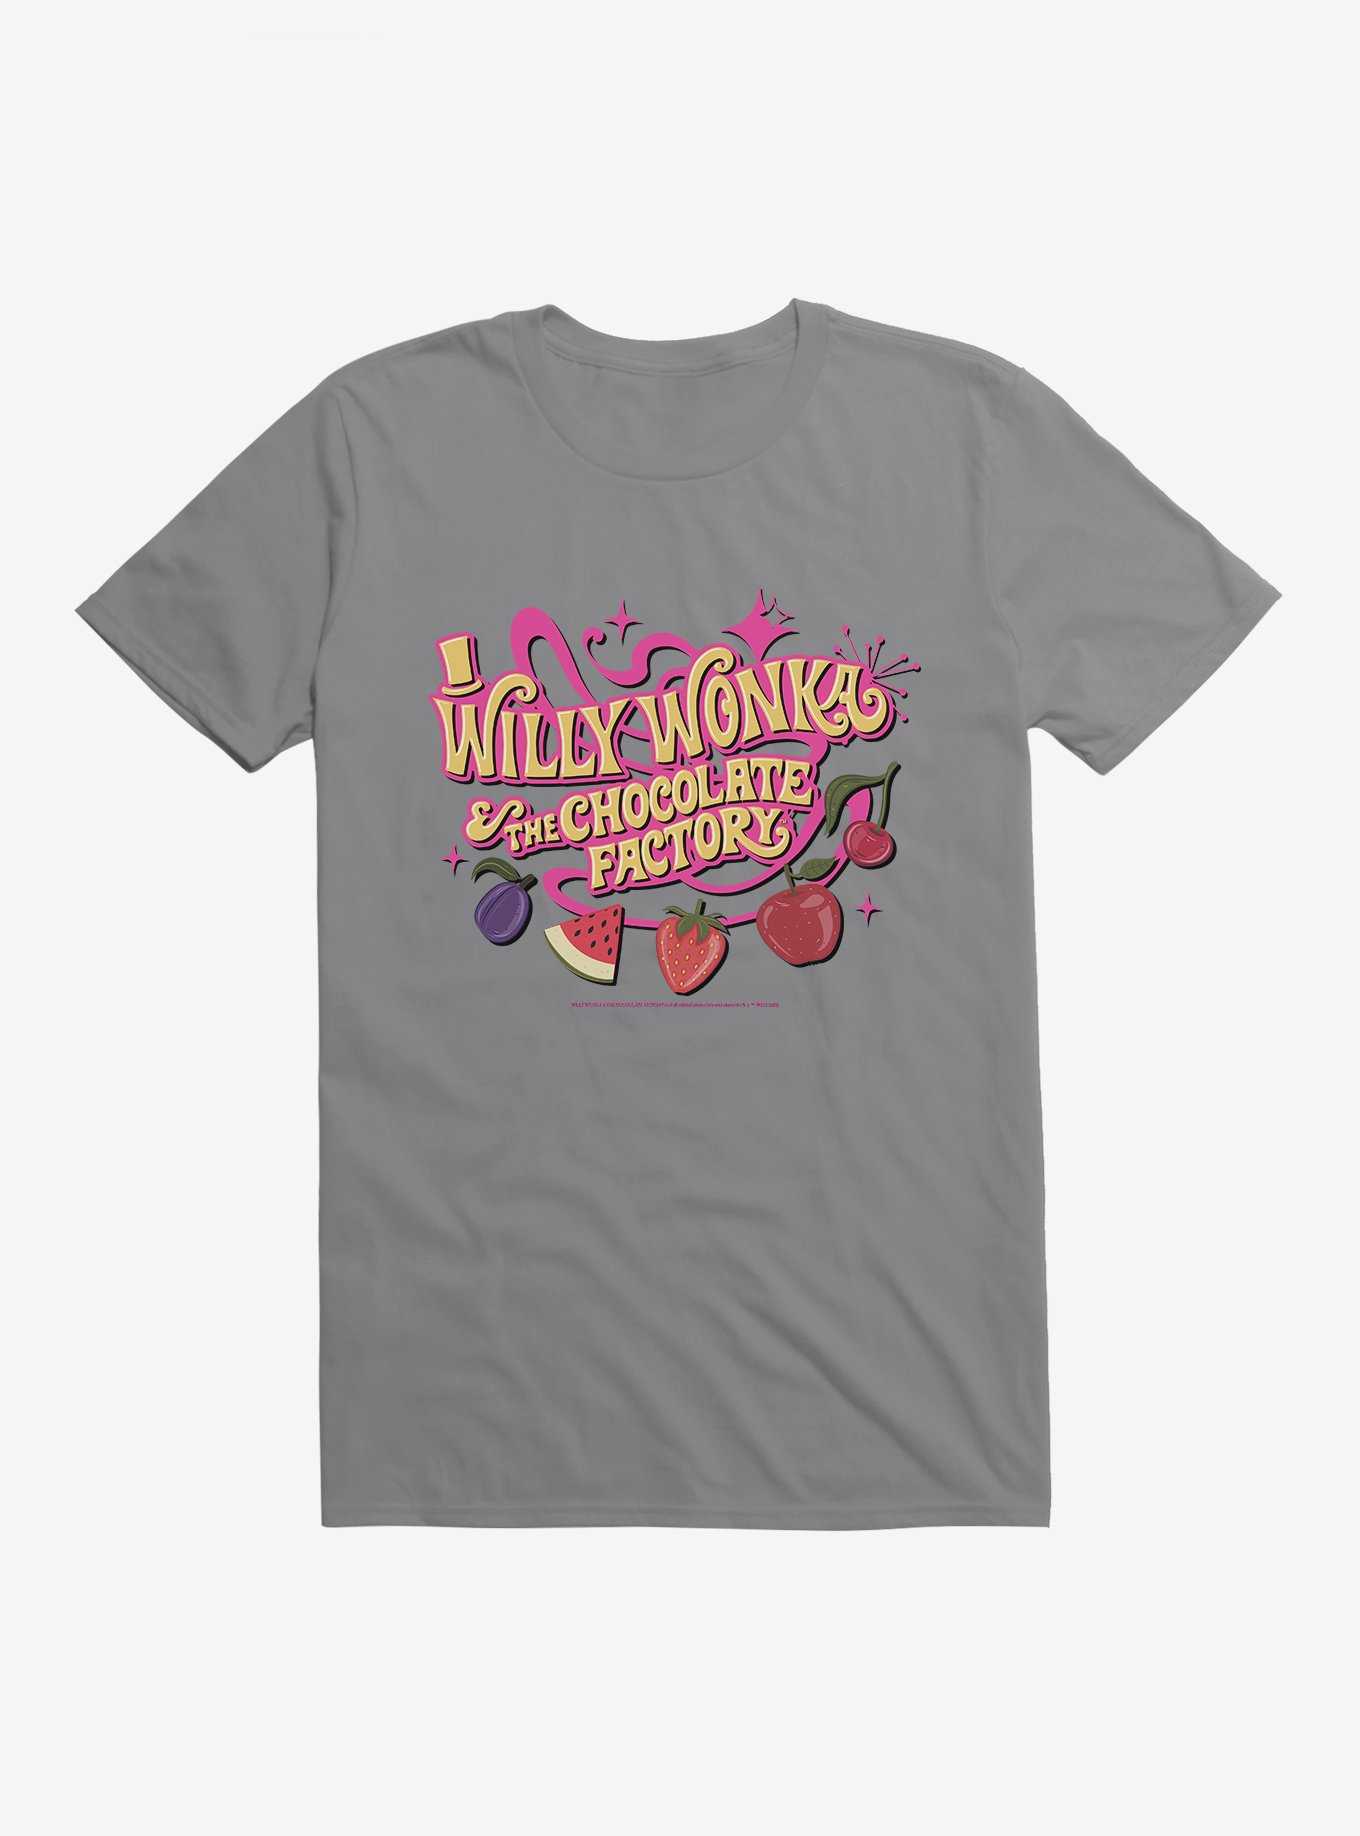 Willy Wonka And The Chocolate Factory Snozzberries Taste Like Snozzberries T-Shirt, , hi-res